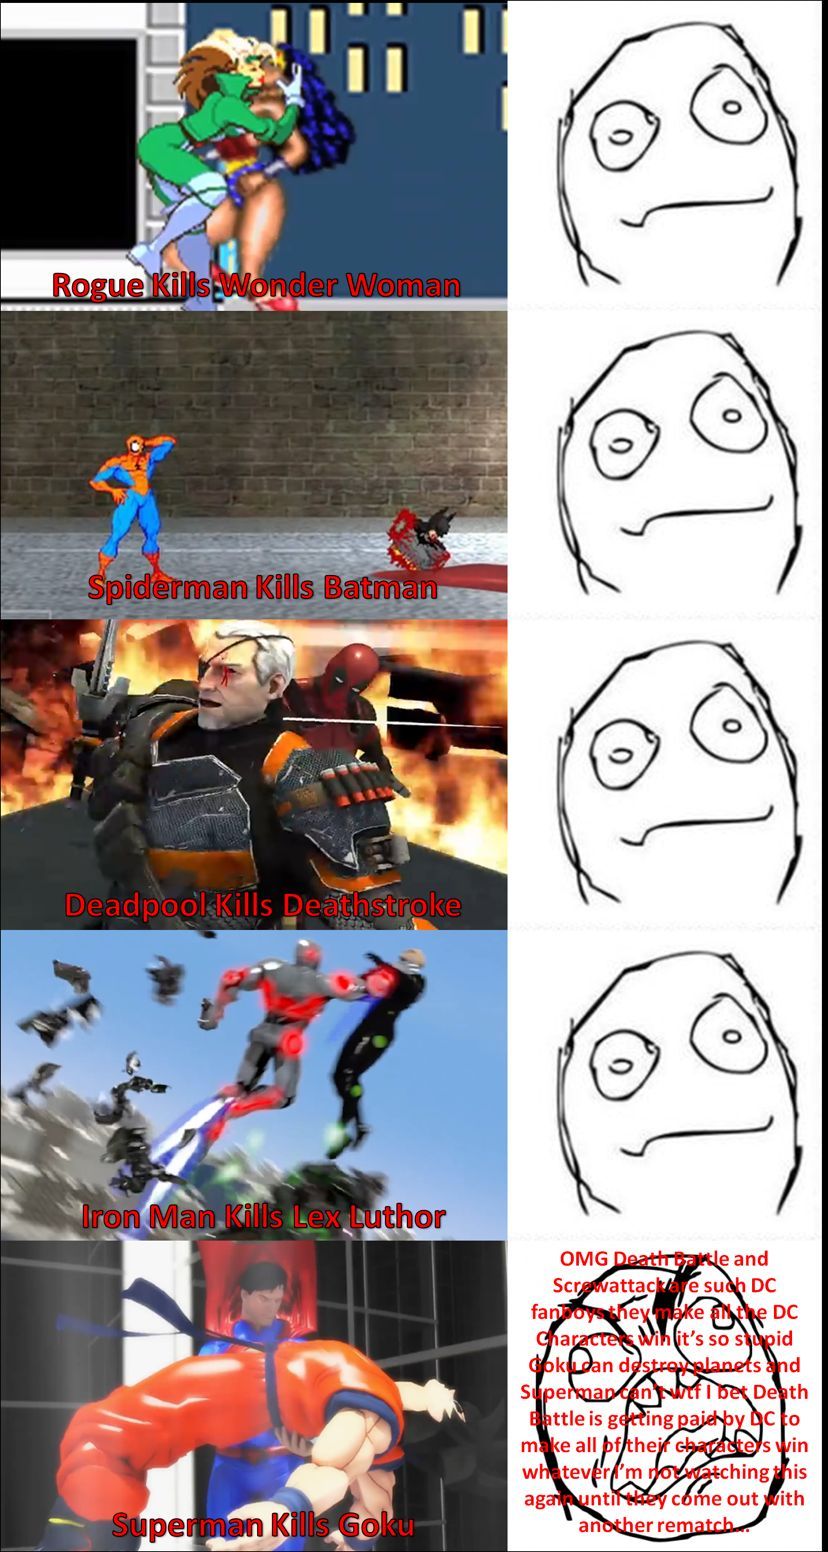 I know Bats beat Captain America, but Marvel is still 7/9 while DC is 2/6 -  Meme subido por Furious George :) Memedroid